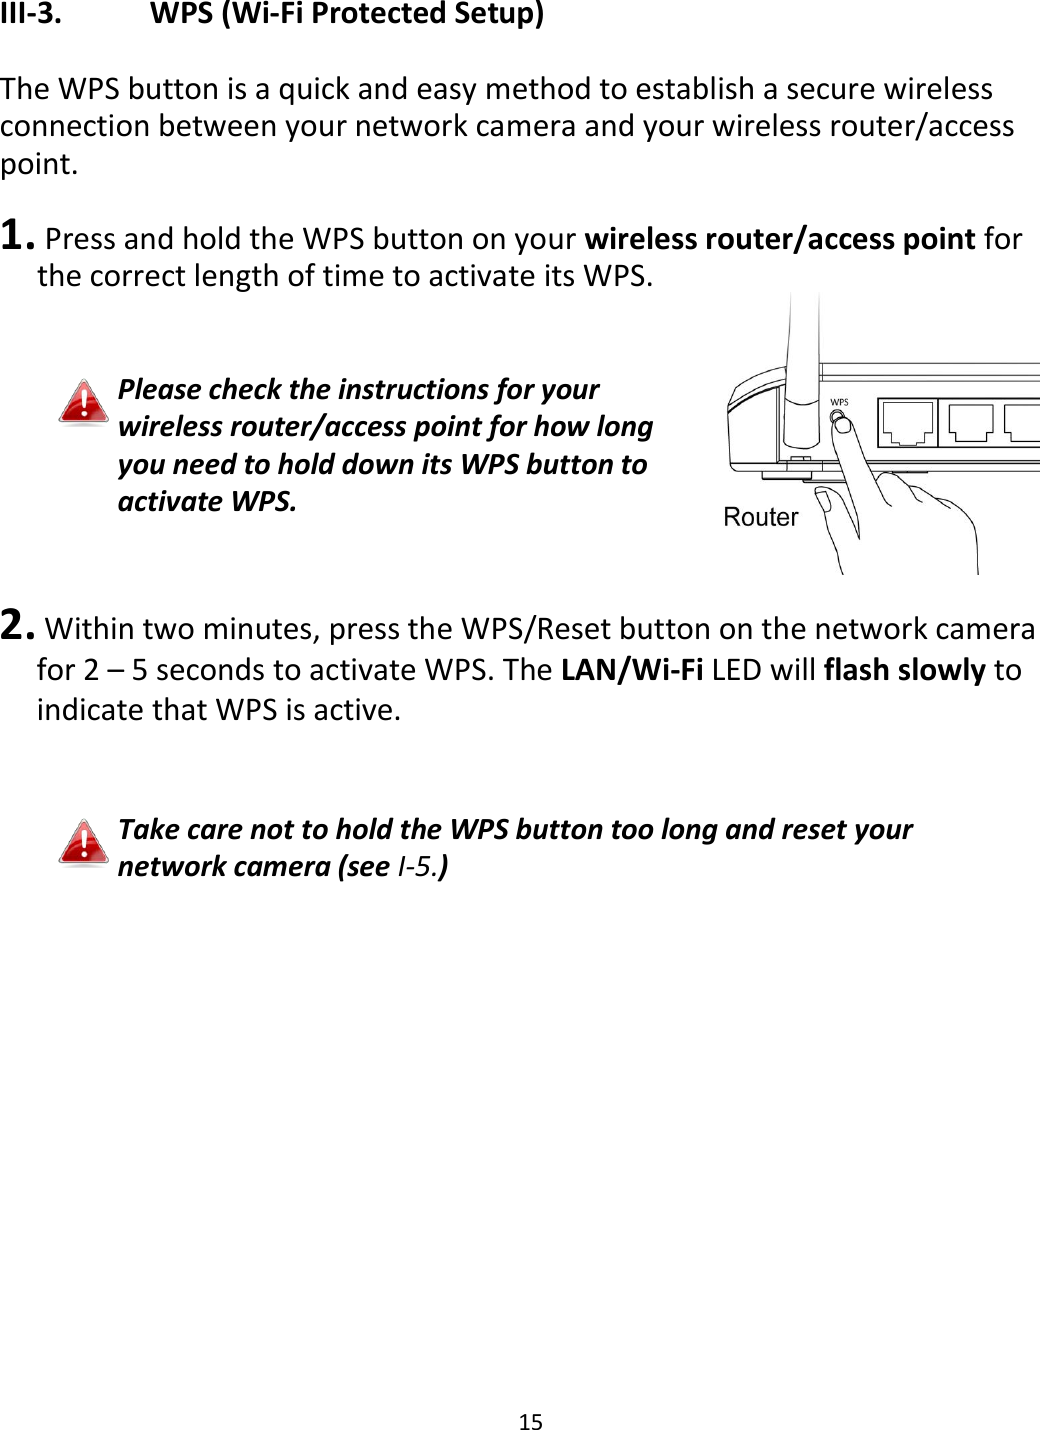 15   III-3.    WPS (Wi-Fi Protected Setup)  The WPS button is a quick and easy method to establish a secure wireless connection between your network camera and your wireless router/access point.   1.  Press and hold the WPS button on your wireless router/access point for the correct length of time to activate its WPS.   Please check the instructions for your wireless router/access point for how long you need to hold down its WPS button to activate WPS.   2. Within two minutes, press the WPS/Reset button on the network camera for 2 – 5 seconds to activate WPS. The LAN/Wi-Fi LED will flash slowly to indicate that WPS is active.    Take care not to hold the WPS button too long and reset your network camera (see I-5.)  